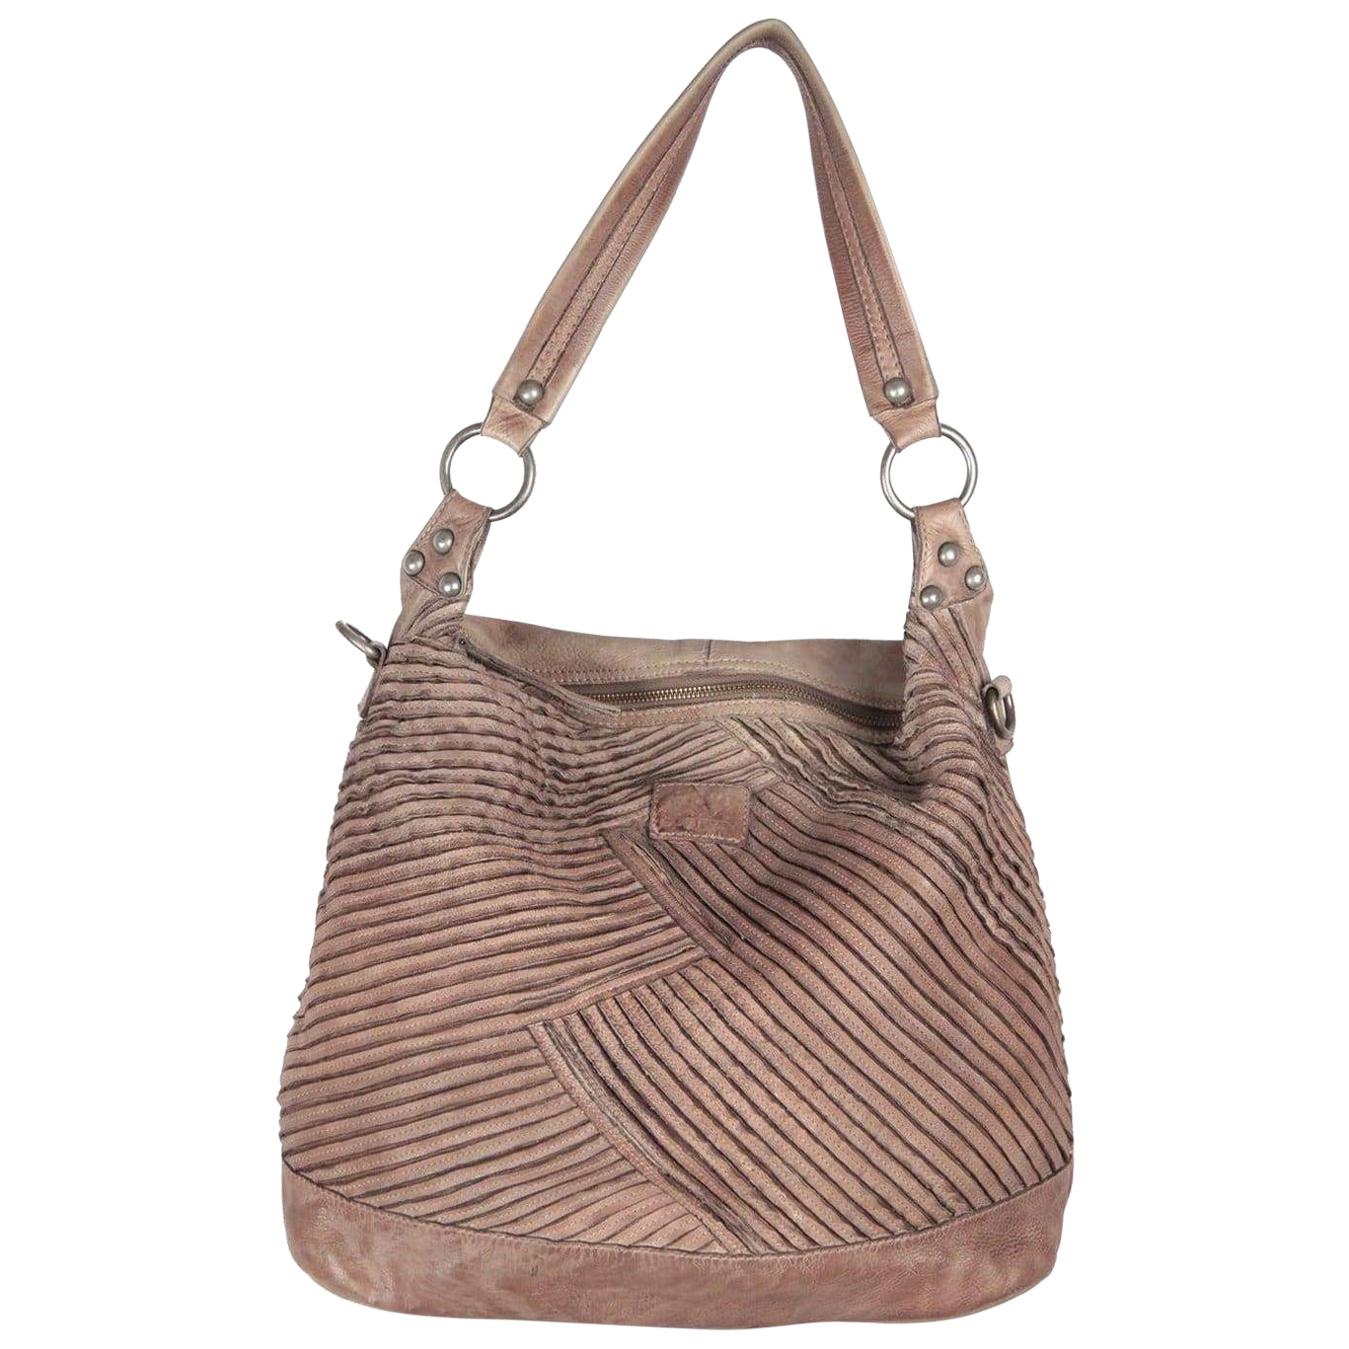 SURI FREY Taupe Pintucked Leather MILEY TOTE Shoulder Bag